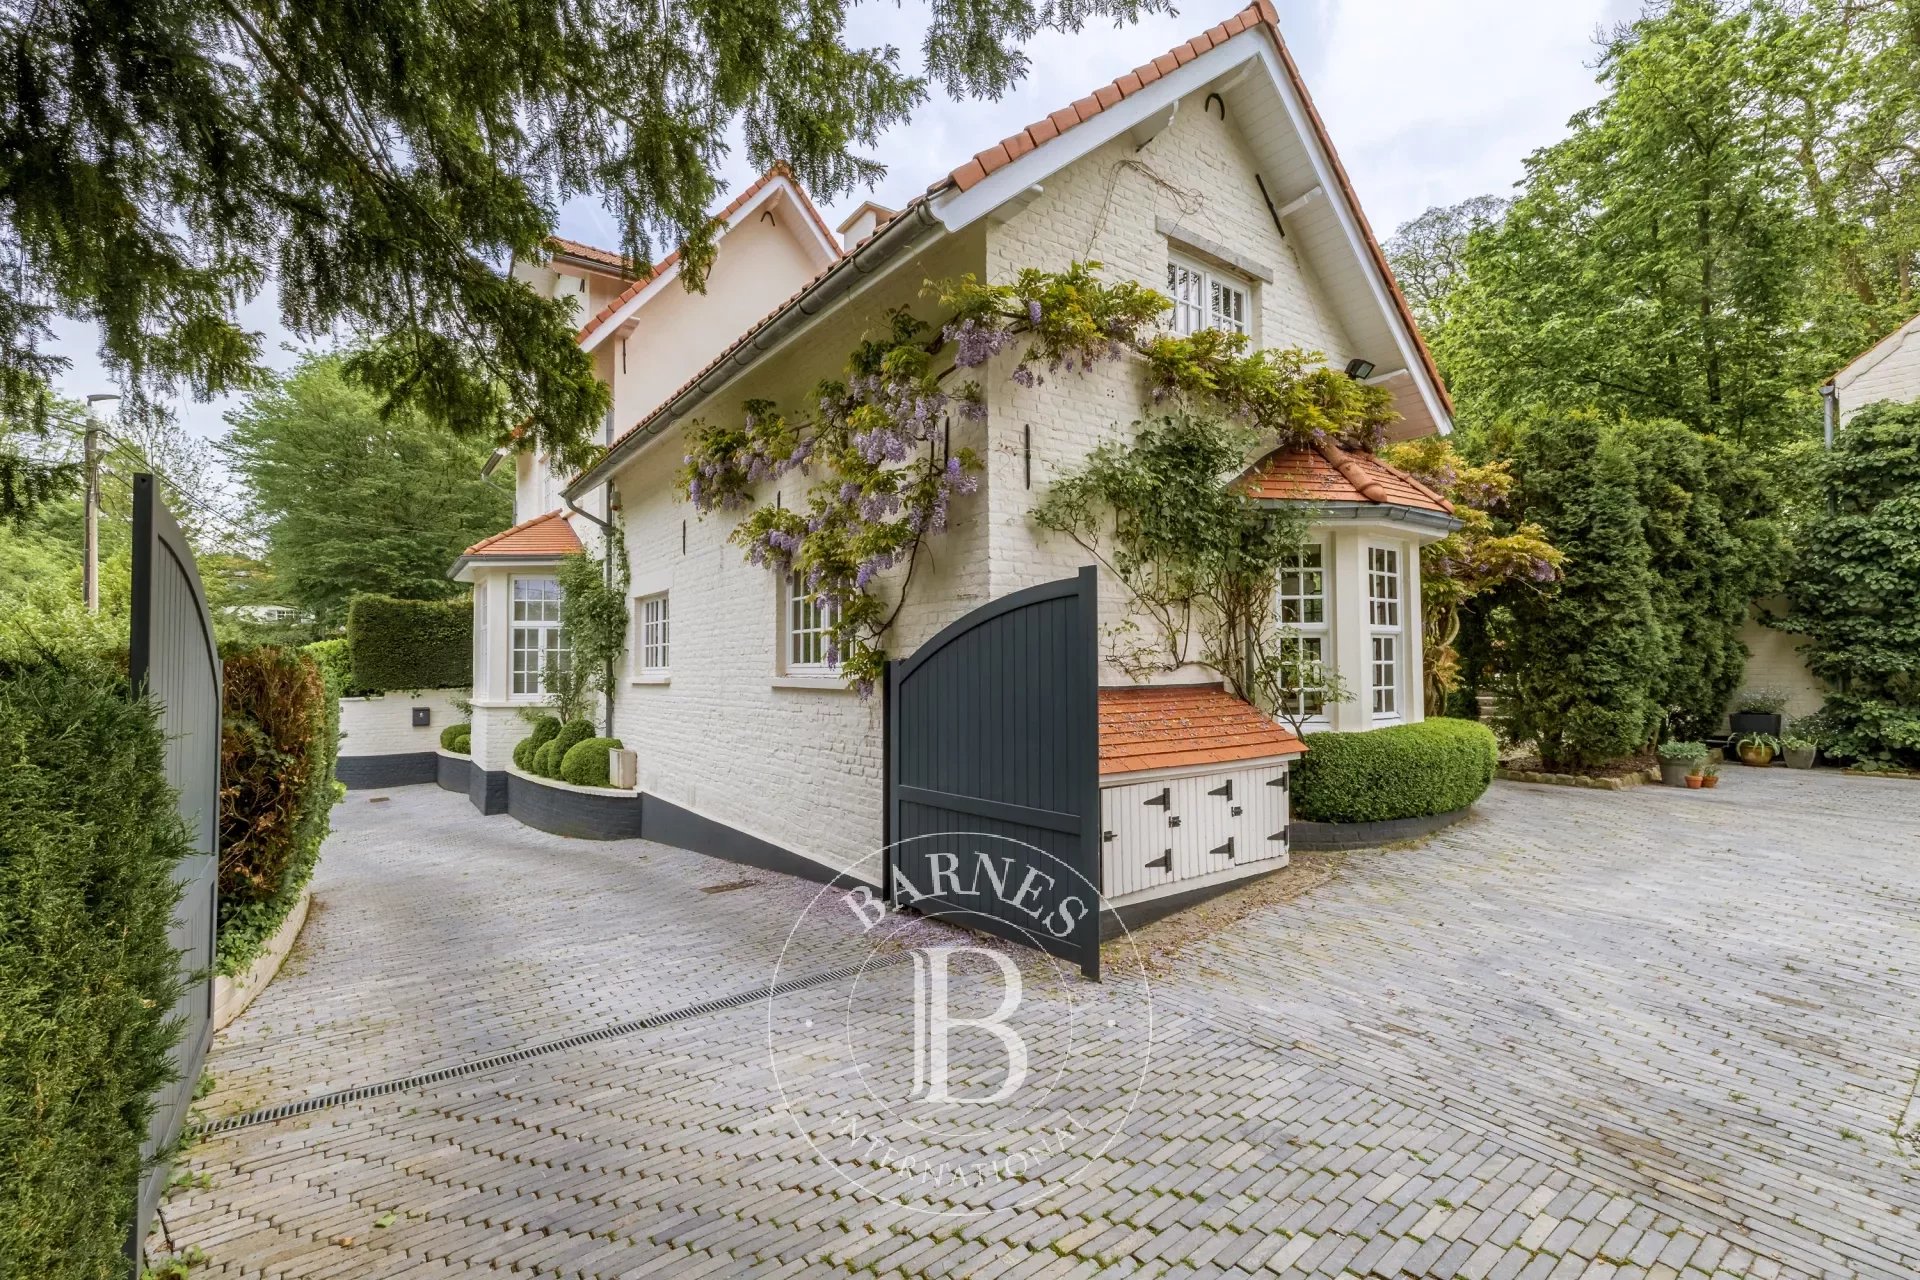 Charming villa in a sought-after neighborhood of Lasne.